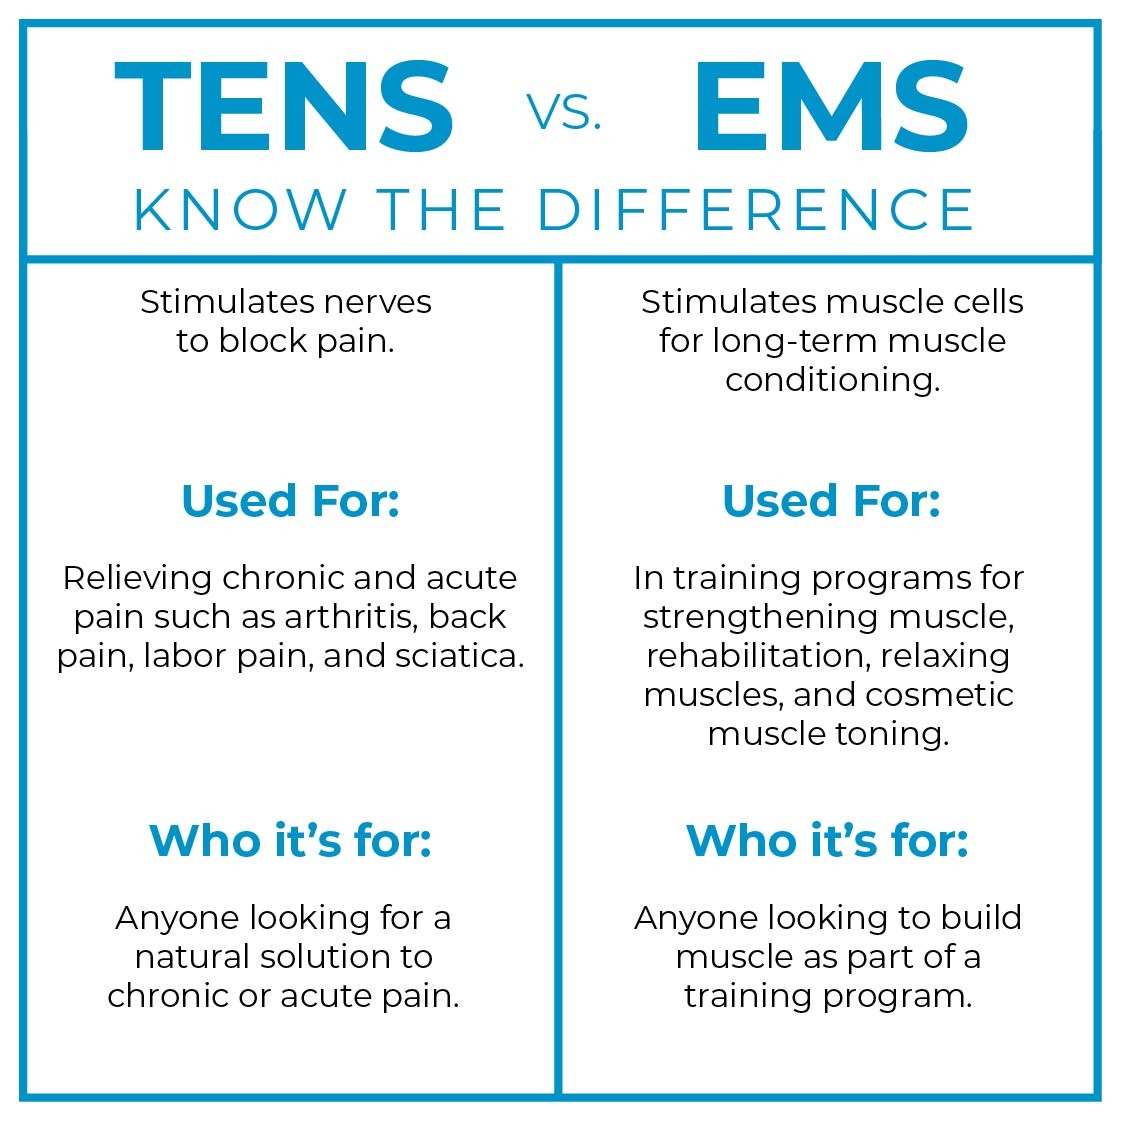 TENS vs. EMS: Know the Difference